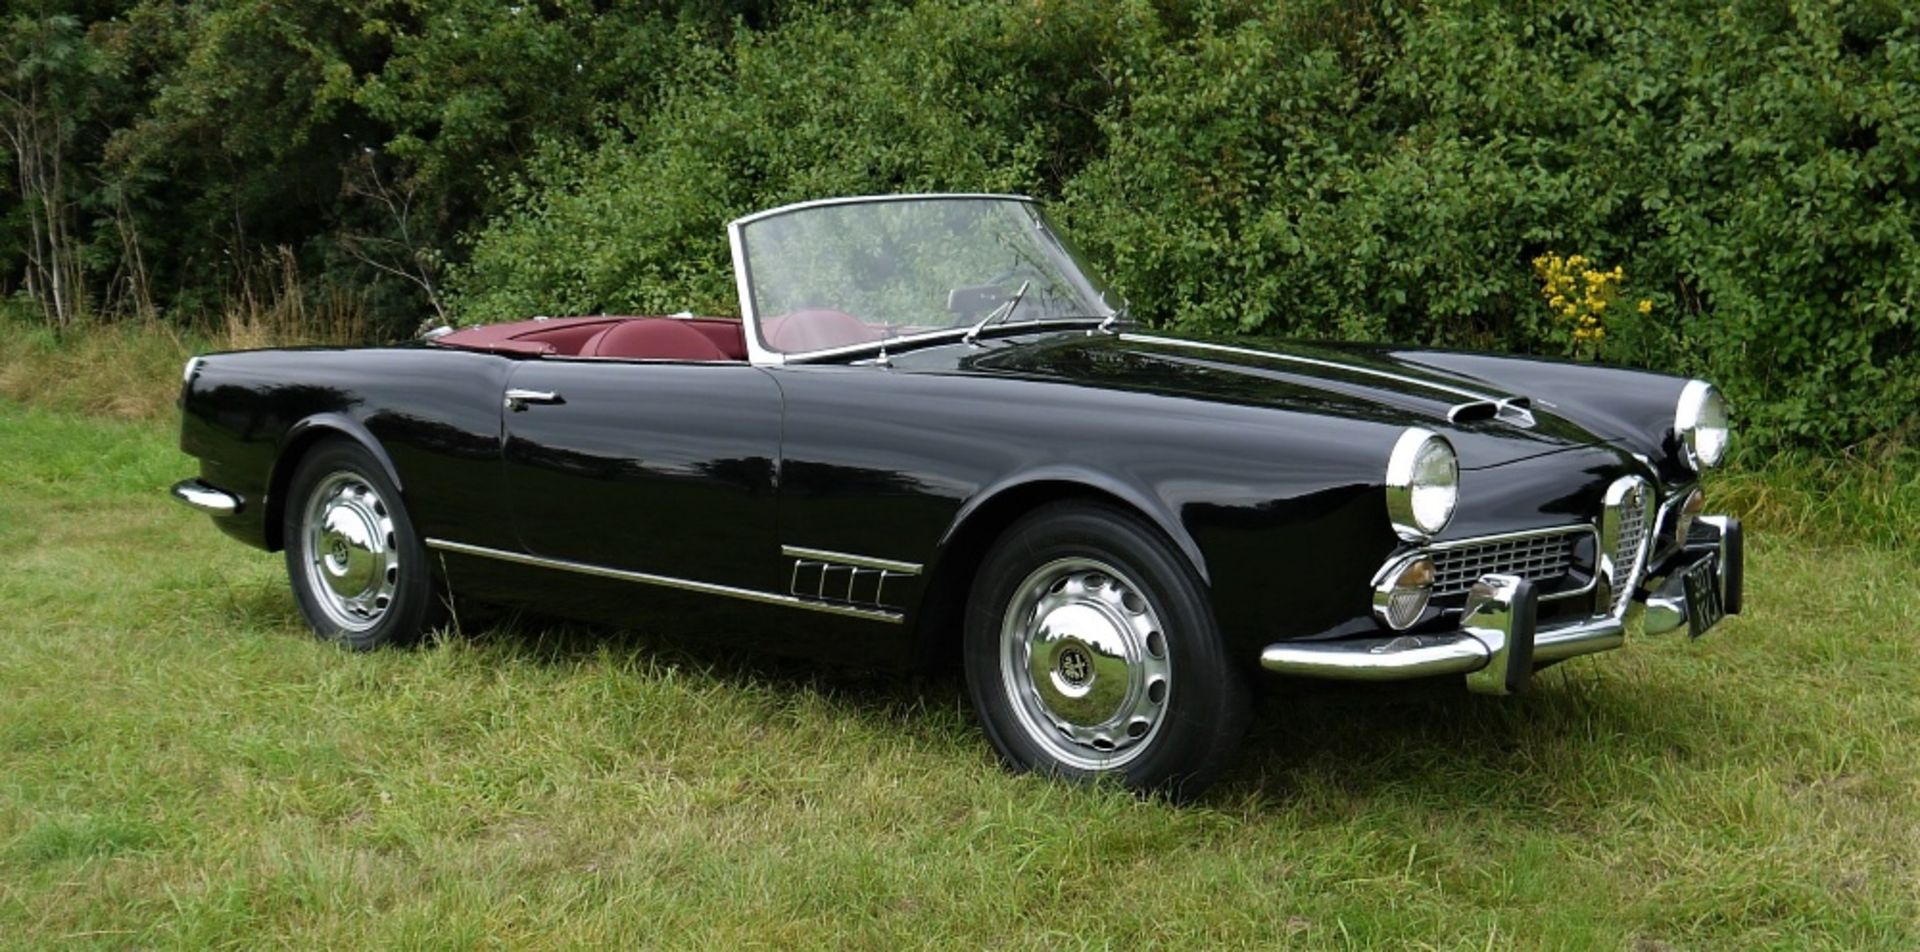 1960 ALFA ROMEO TOURING SPIDER Registration Number: 307 XVJ Chassis Number: AR*10204*000517 Recorded - Image 4 of 36